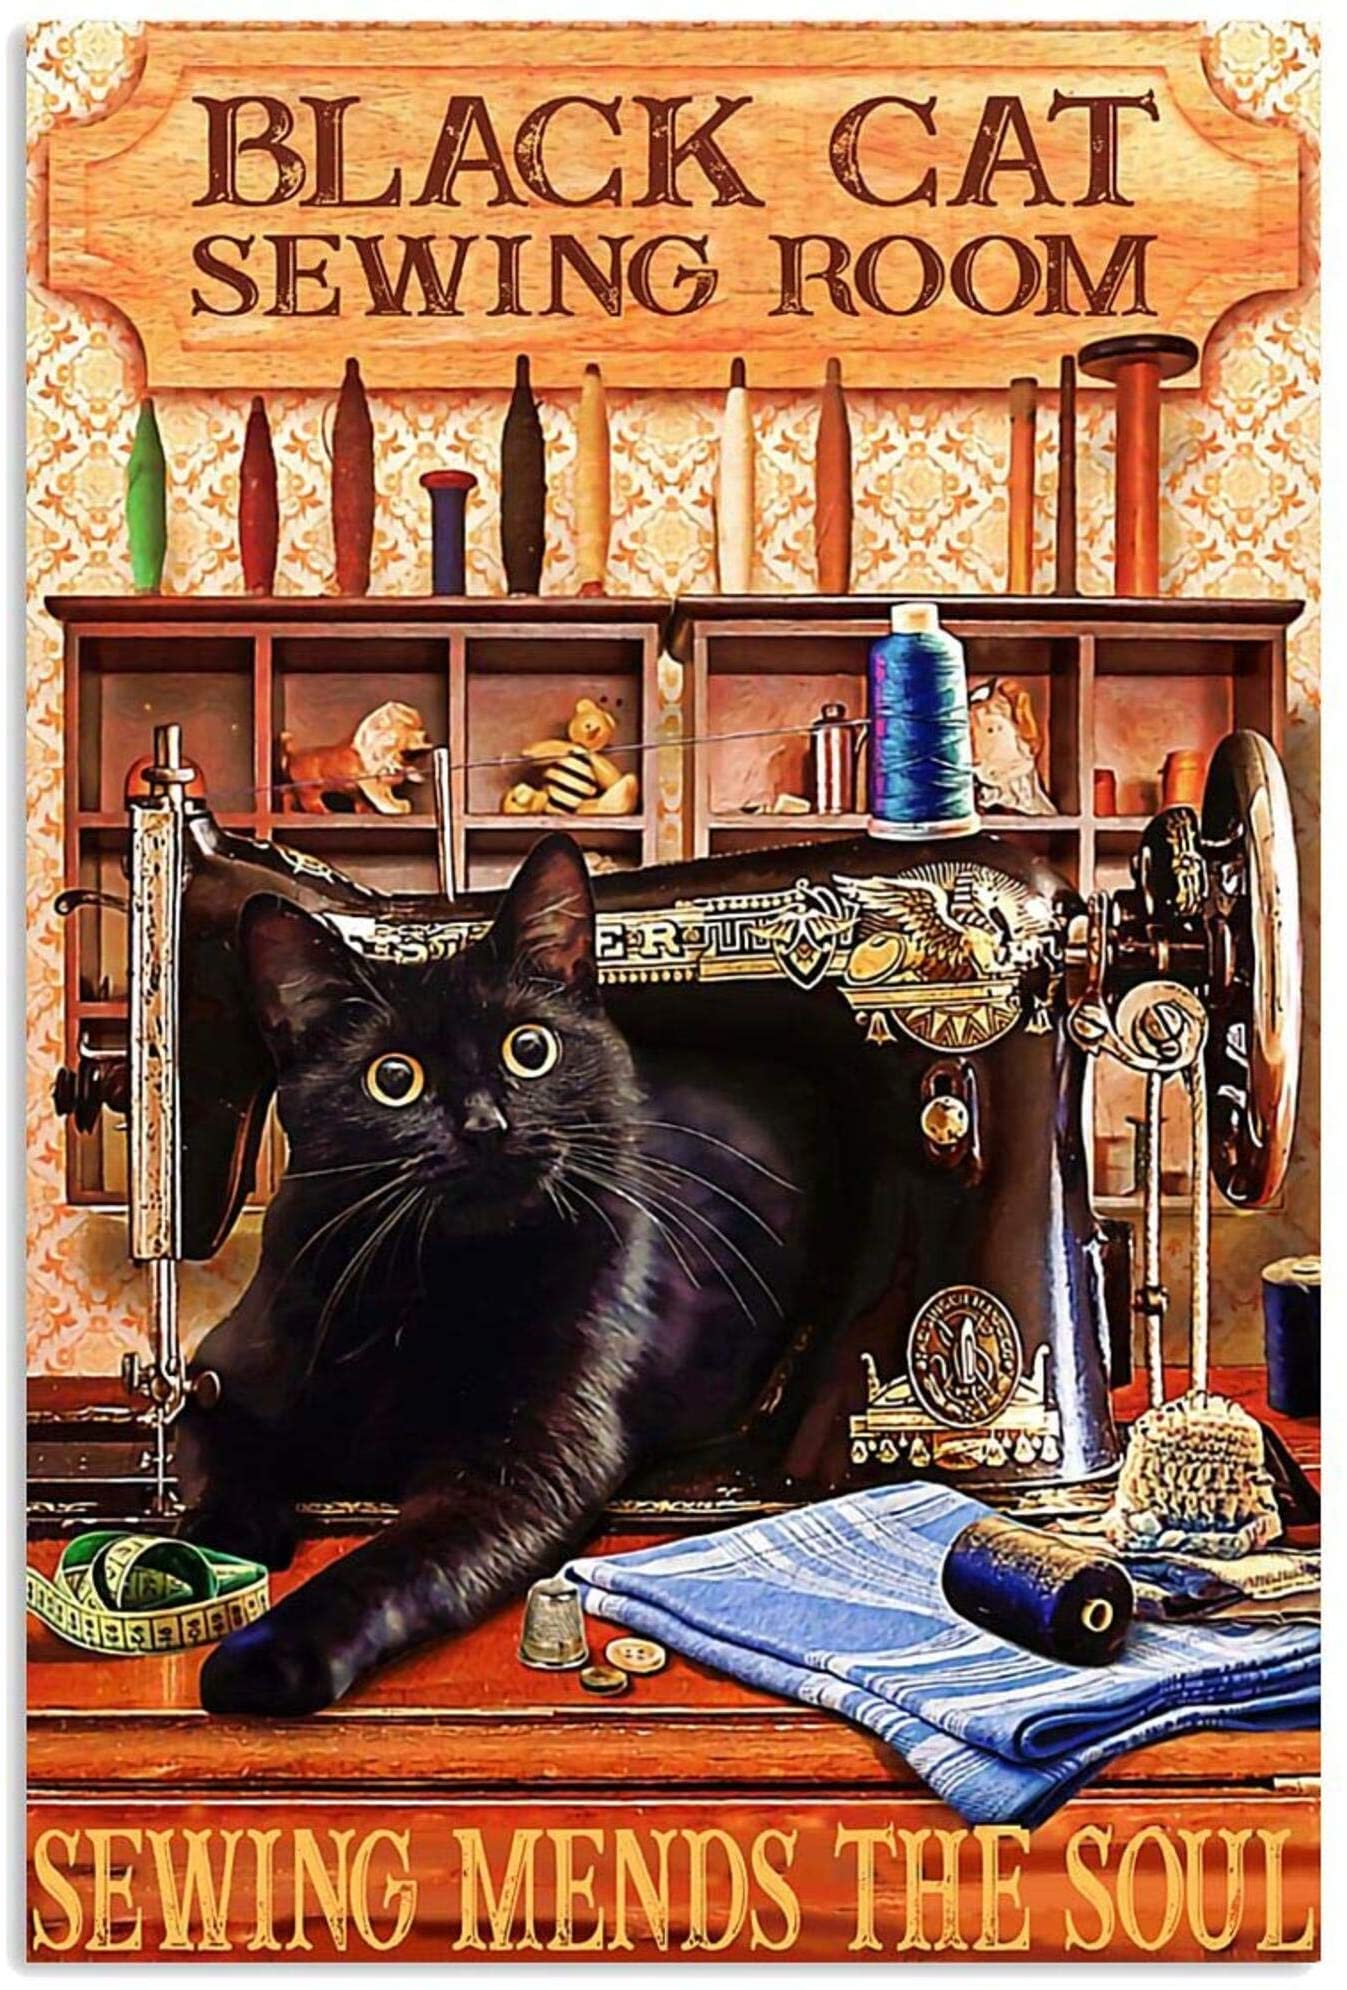 Black Cat Sewing Room Sewing Mends The Soul